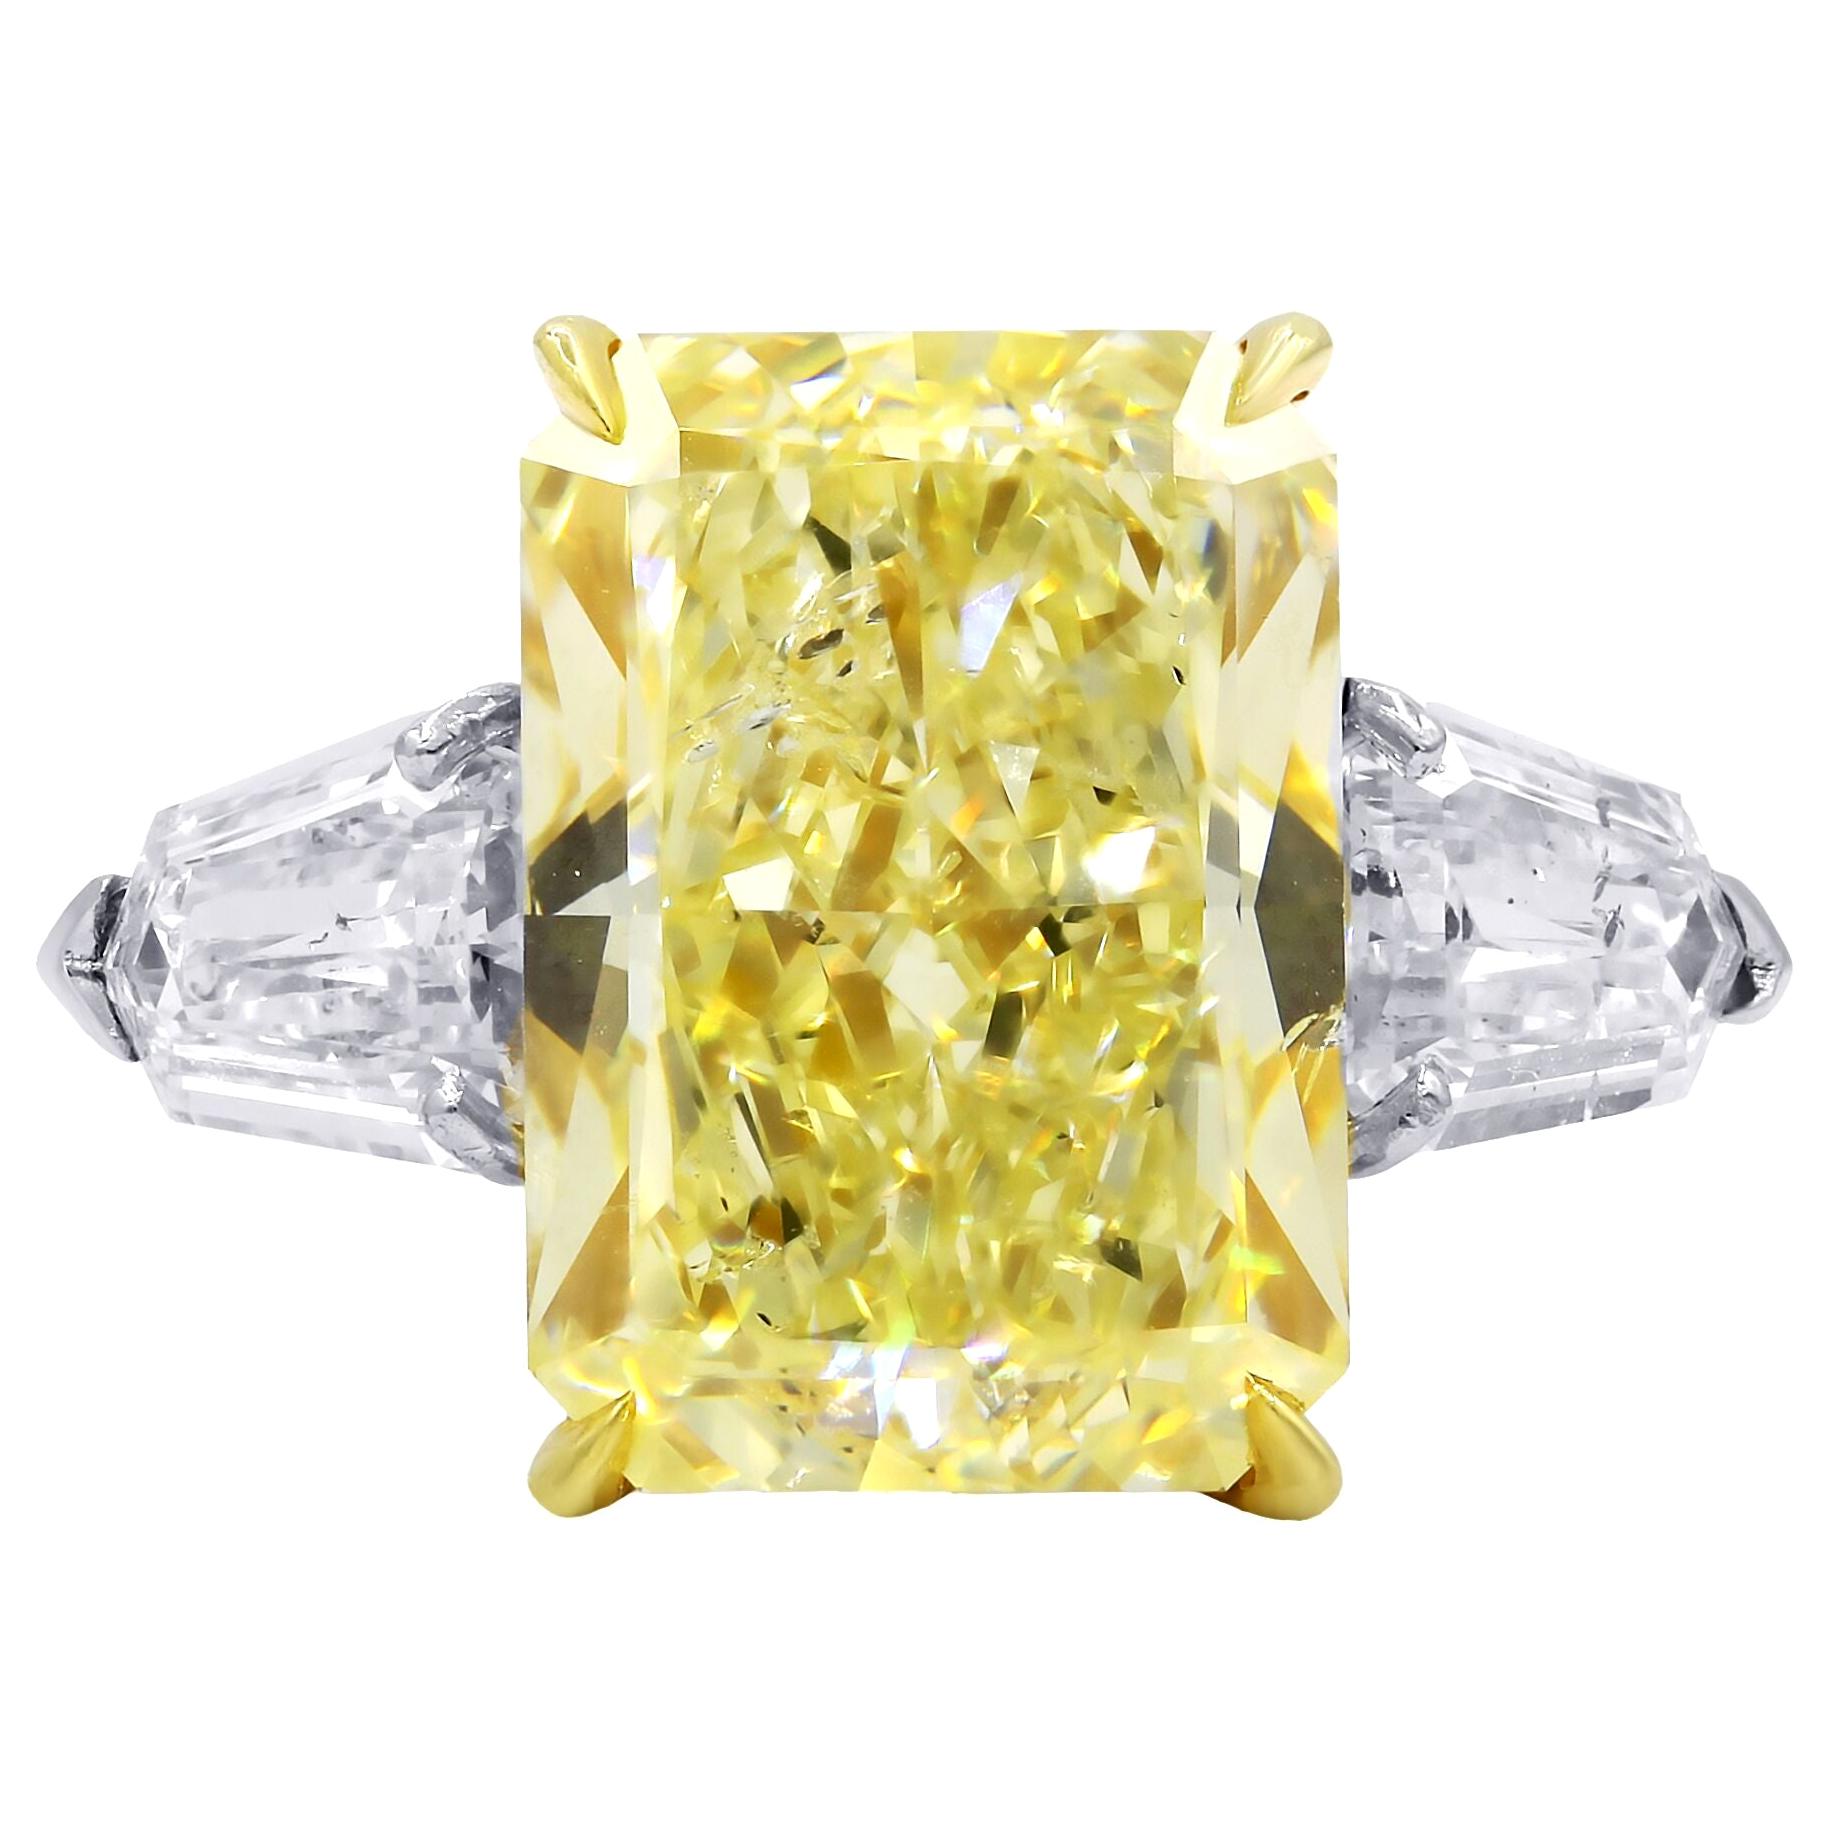 Magnificent Platinum and 18kt Fancy Diamond Ring with Radiant Cut Fancy Yellow